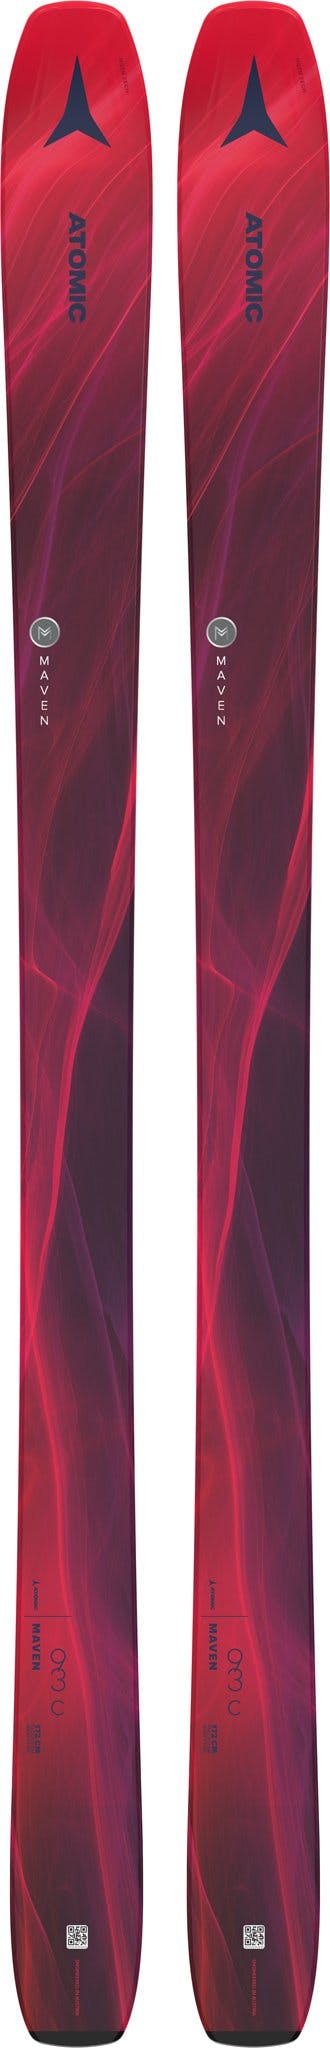 Product image for Maven 93 C Skis - Women's